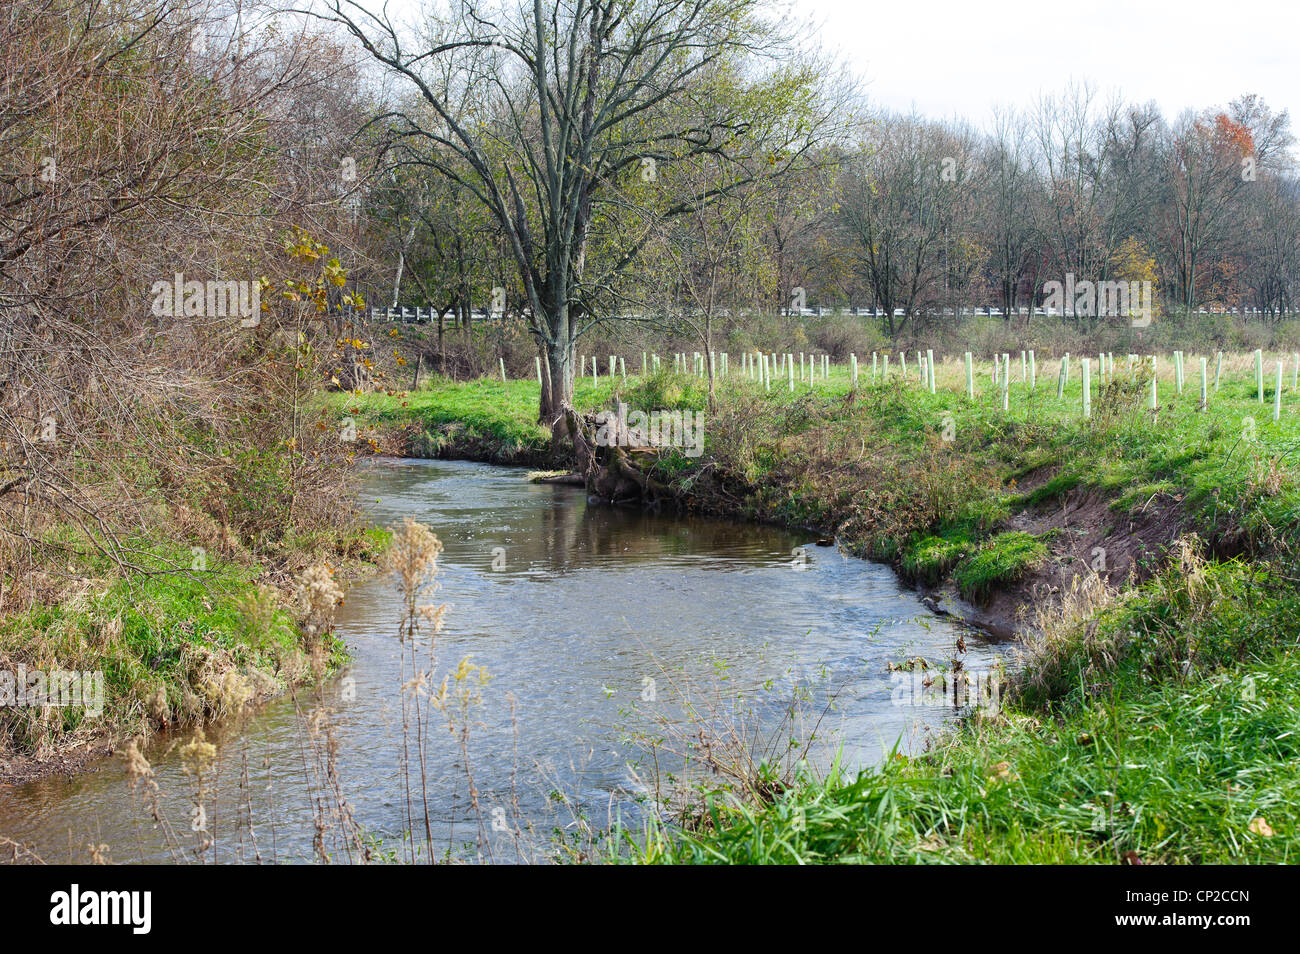 CONSERVATION RESERVE ENHANCEMENT PROGRAM (CREP)PLANTED TREES IN PROTECTIVE TUBES FOR STREAM BANK ENHANCEMENT CONEWAGO CREEK Stock Photo